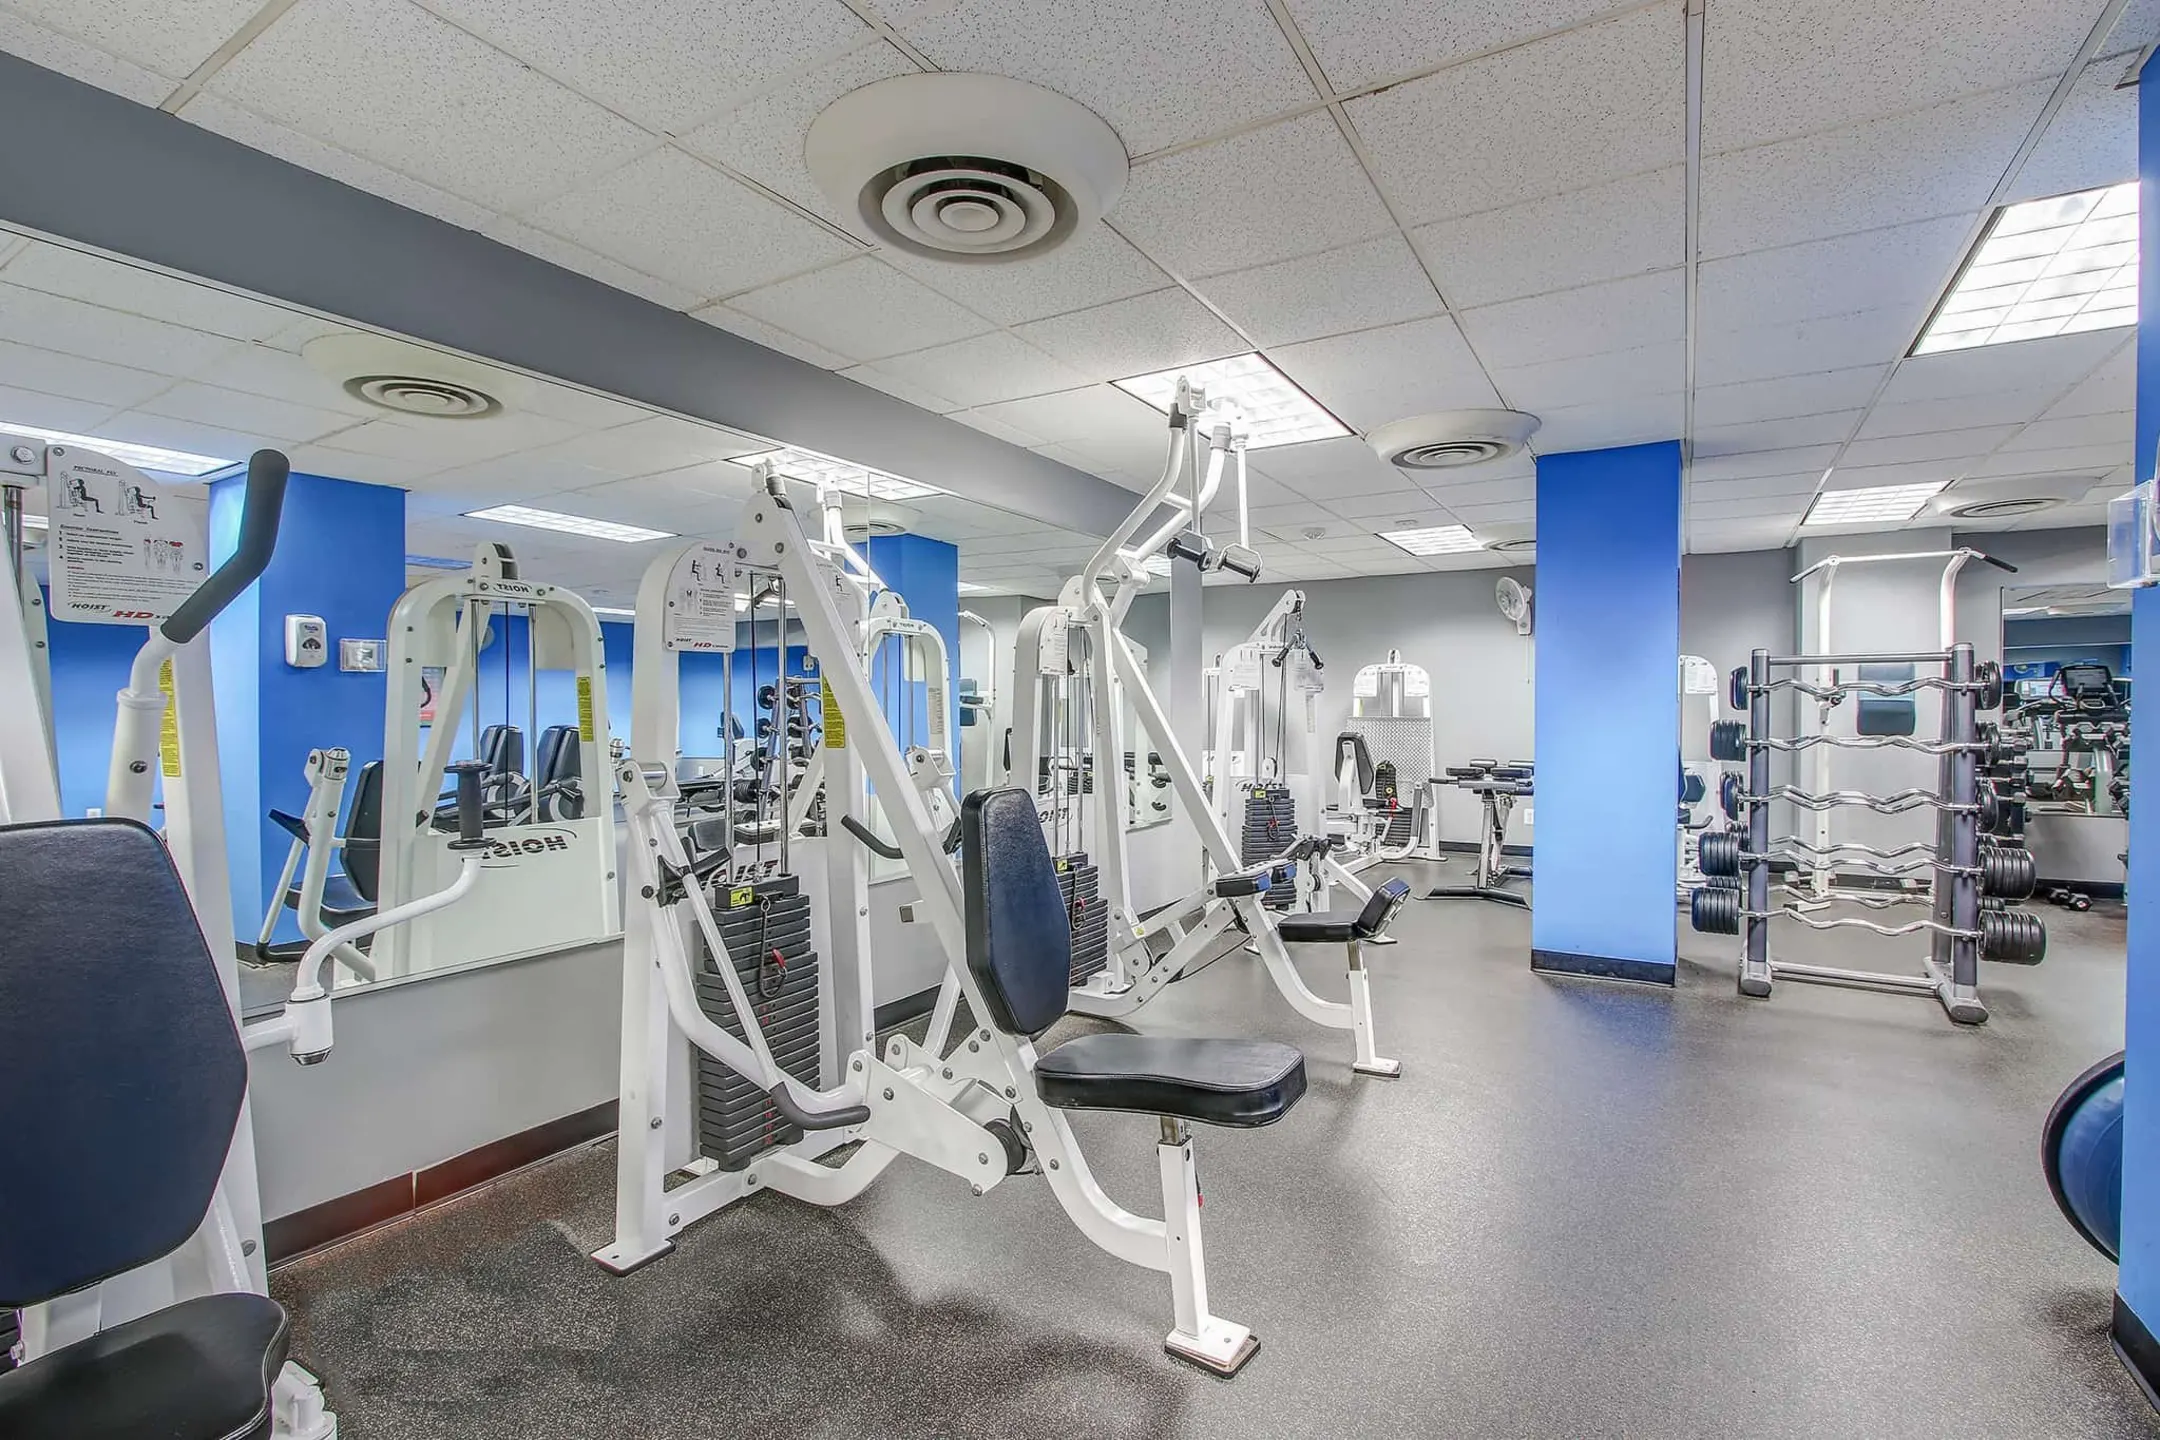 Fitness Weight Room - The Highlands of Chevy Chase - Chevy Chase, MD